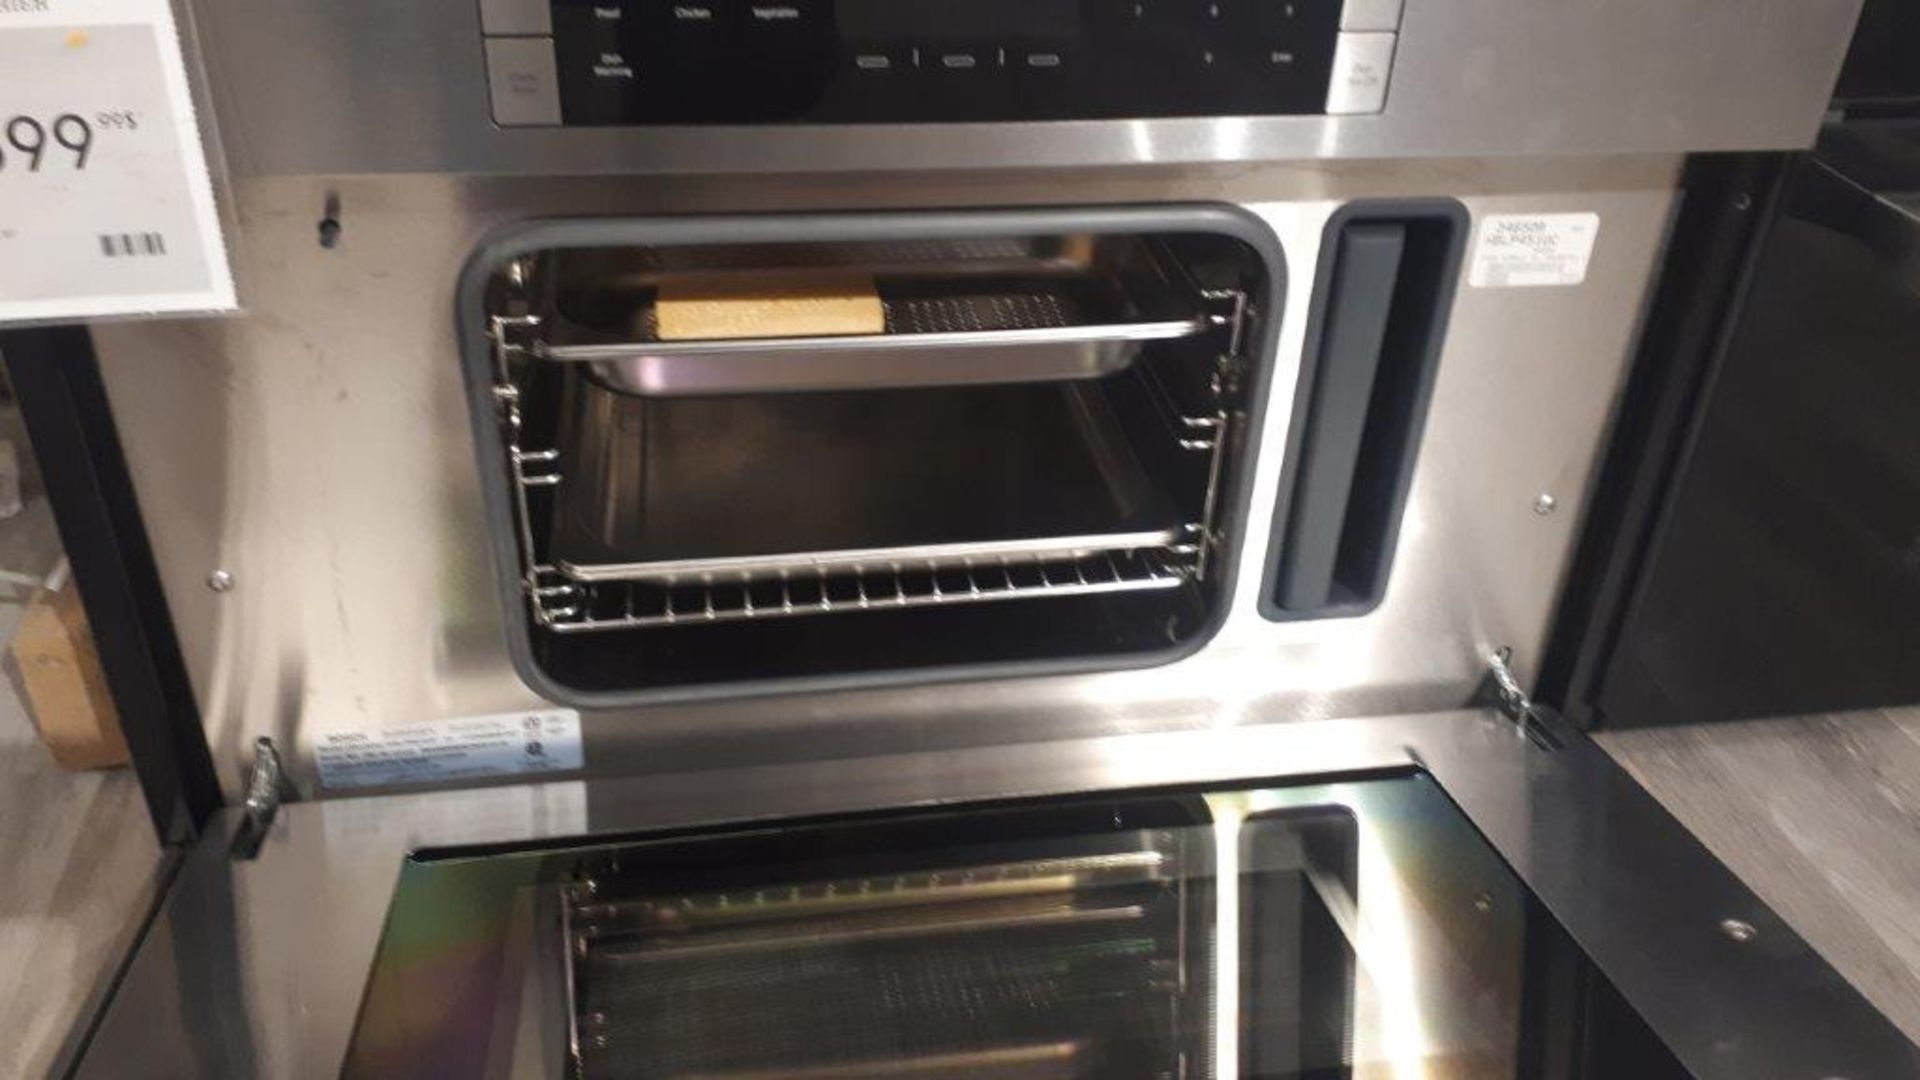 Bosch HSLP451UC 30” stainless steel wall steam convection oven - Image 3 of 4